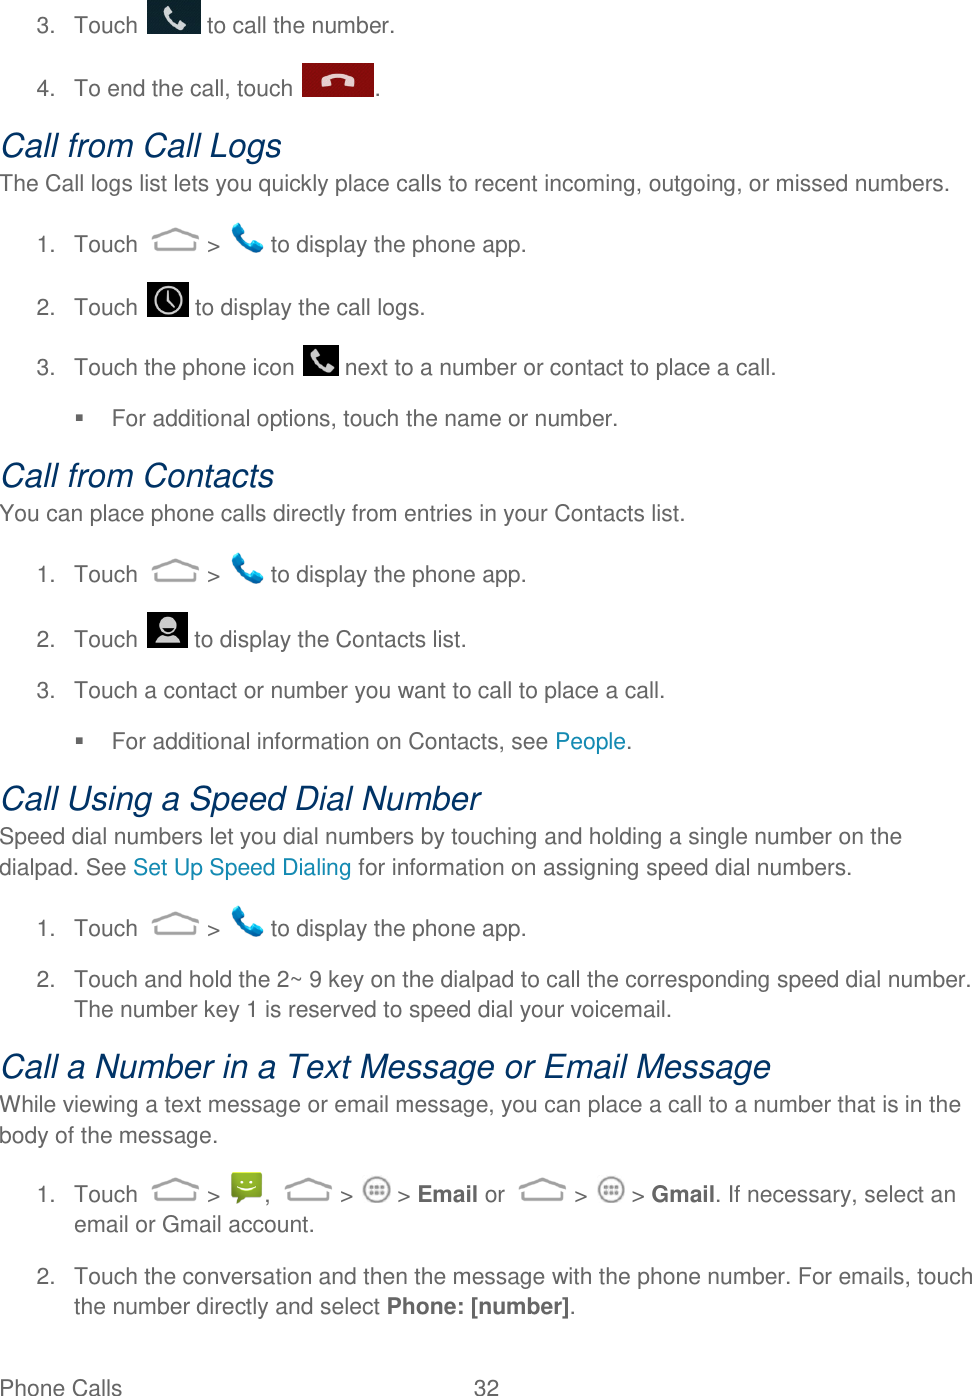 Phone Calls  32   3.  Touch   to call the number.  4.  To end the call, touch  . Call from Call Logs The Call logs list lets you quickly place calls to recent incoming, outgoing, or missed numbers. 1.  Touch   &gt;   to display the phone app. 2.  Touch   to display the call logs. 3.  Touch the phone icon   next to a number or contact to place a call.   For additional options, touch the name or number. Call from Contacts You can place phone calls directly from entries in your Contacts list. 1.  Touch   &gt;   to display the phone app. 2.  Touch   to display the Contacts list. 3.  Touch a contact or number you want to call to place a call.   For additional information on Contacts, see People. Call Using a Speed Dial Number Speed dial numbers let you dial numbers by touching and holding a single number on the dialpad. See Set Up Speed Dialing for information on assigning speed dial numbers. 1.  Touch   &gt;   to display the phone app. 2.  Touch and hold the 2~ 9 key on the dialpad to call the corresponding speed dial number. The number key 1 is reserved to speed dial your voicemail. Call a Number in a Text Message or Email Message While viewing a text message or email message, you can place a call to a number that is in the body of the message.  1.  Touch   &gt;  ,   &gt;   &gt; Email or  &gt;   &gt; Gmail. If necessary, select an email or Gmail account. 2.  Touch the conversation and then the message with the phone number. For emails, touch the number directly and select Phone: [number]. 